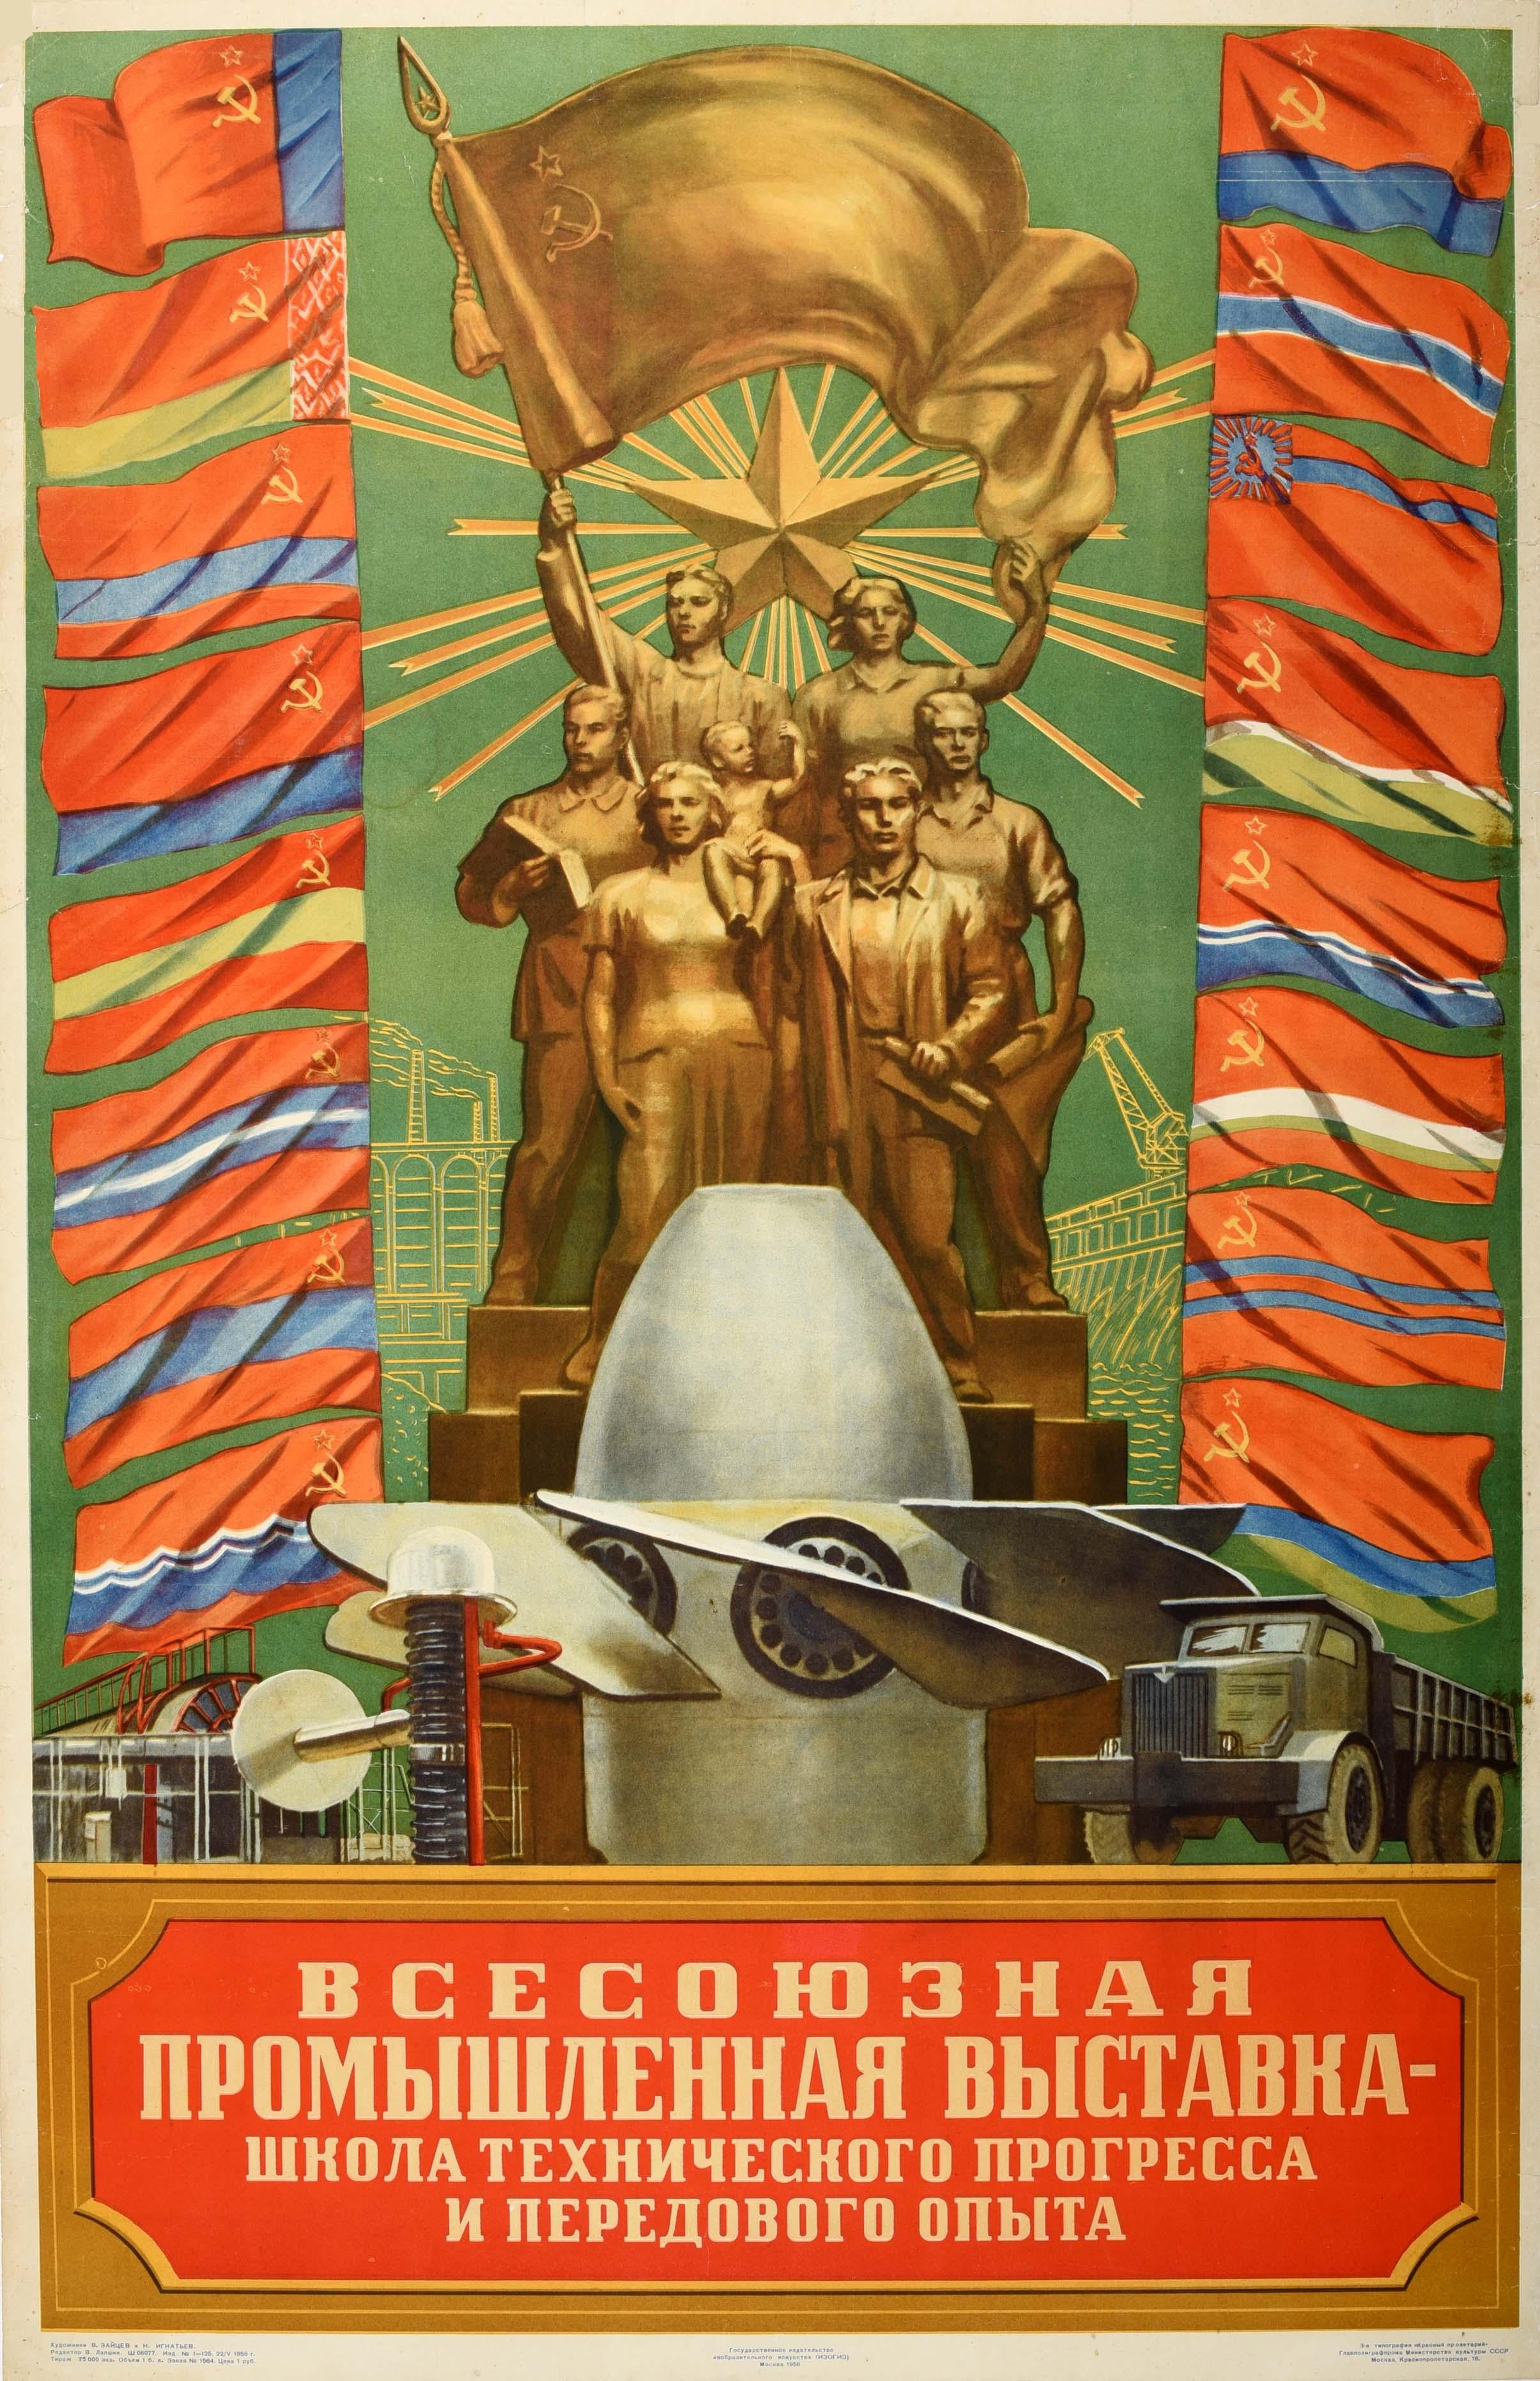 Unknown Print - Original Vintage Poster For Industrial Exhibition Moscow USSR Technical Progress